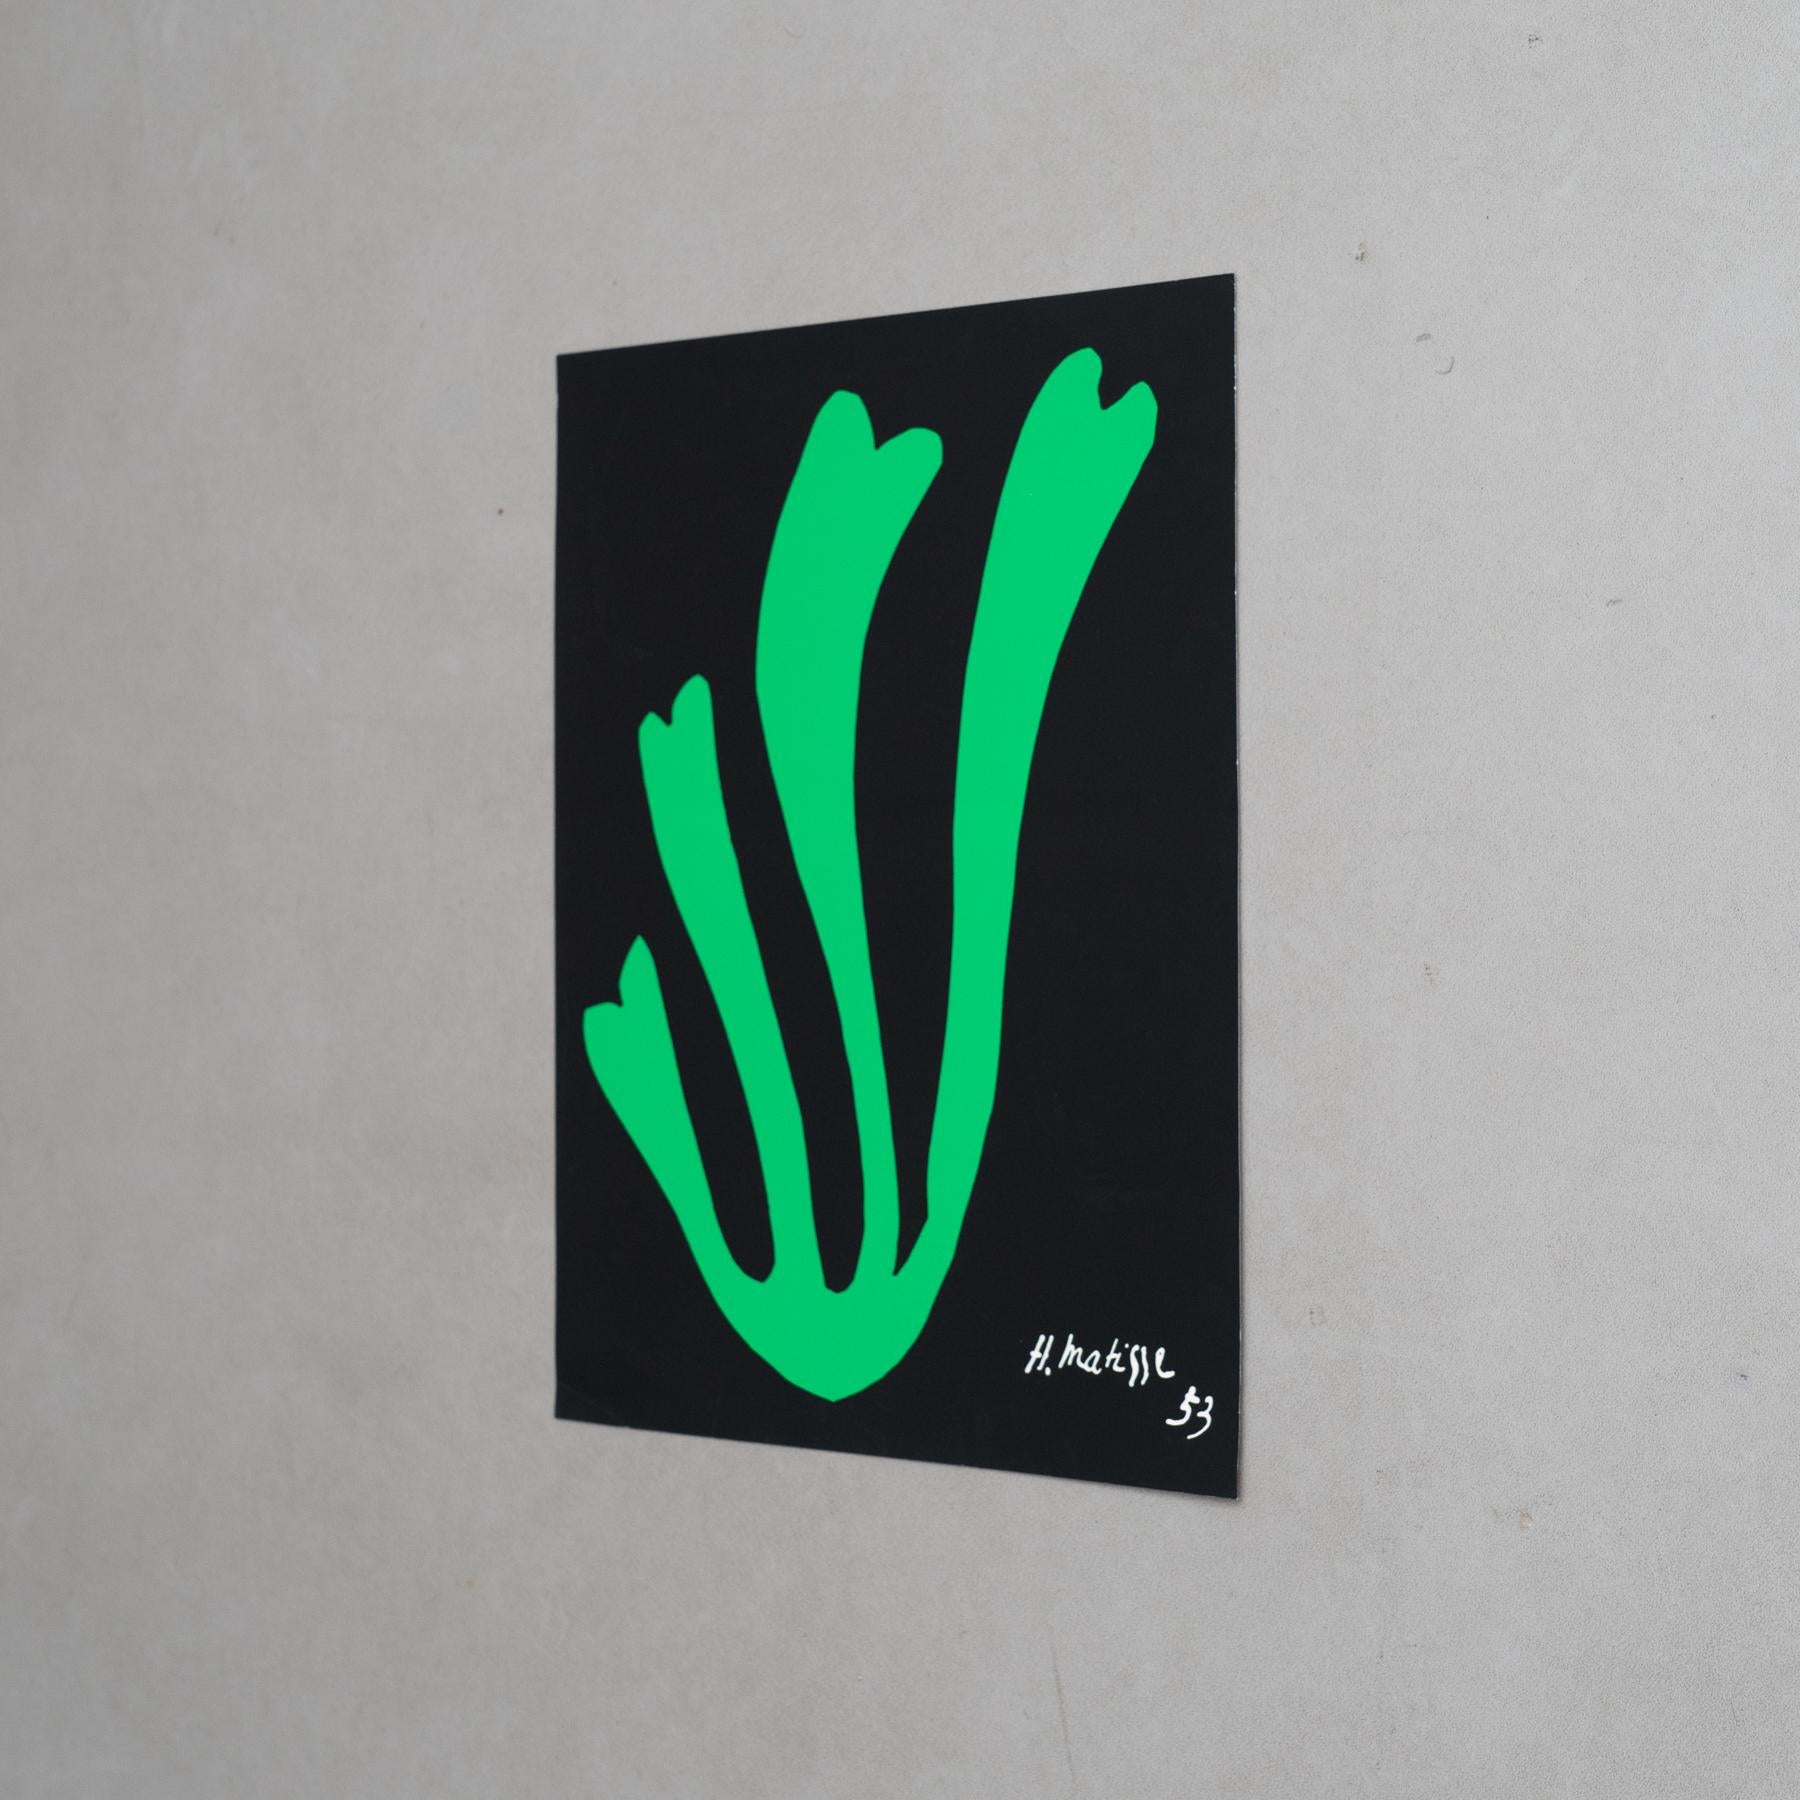 French Henri Matisse Fern Cut Out Lithography in Black and Green, 1953 For Sale